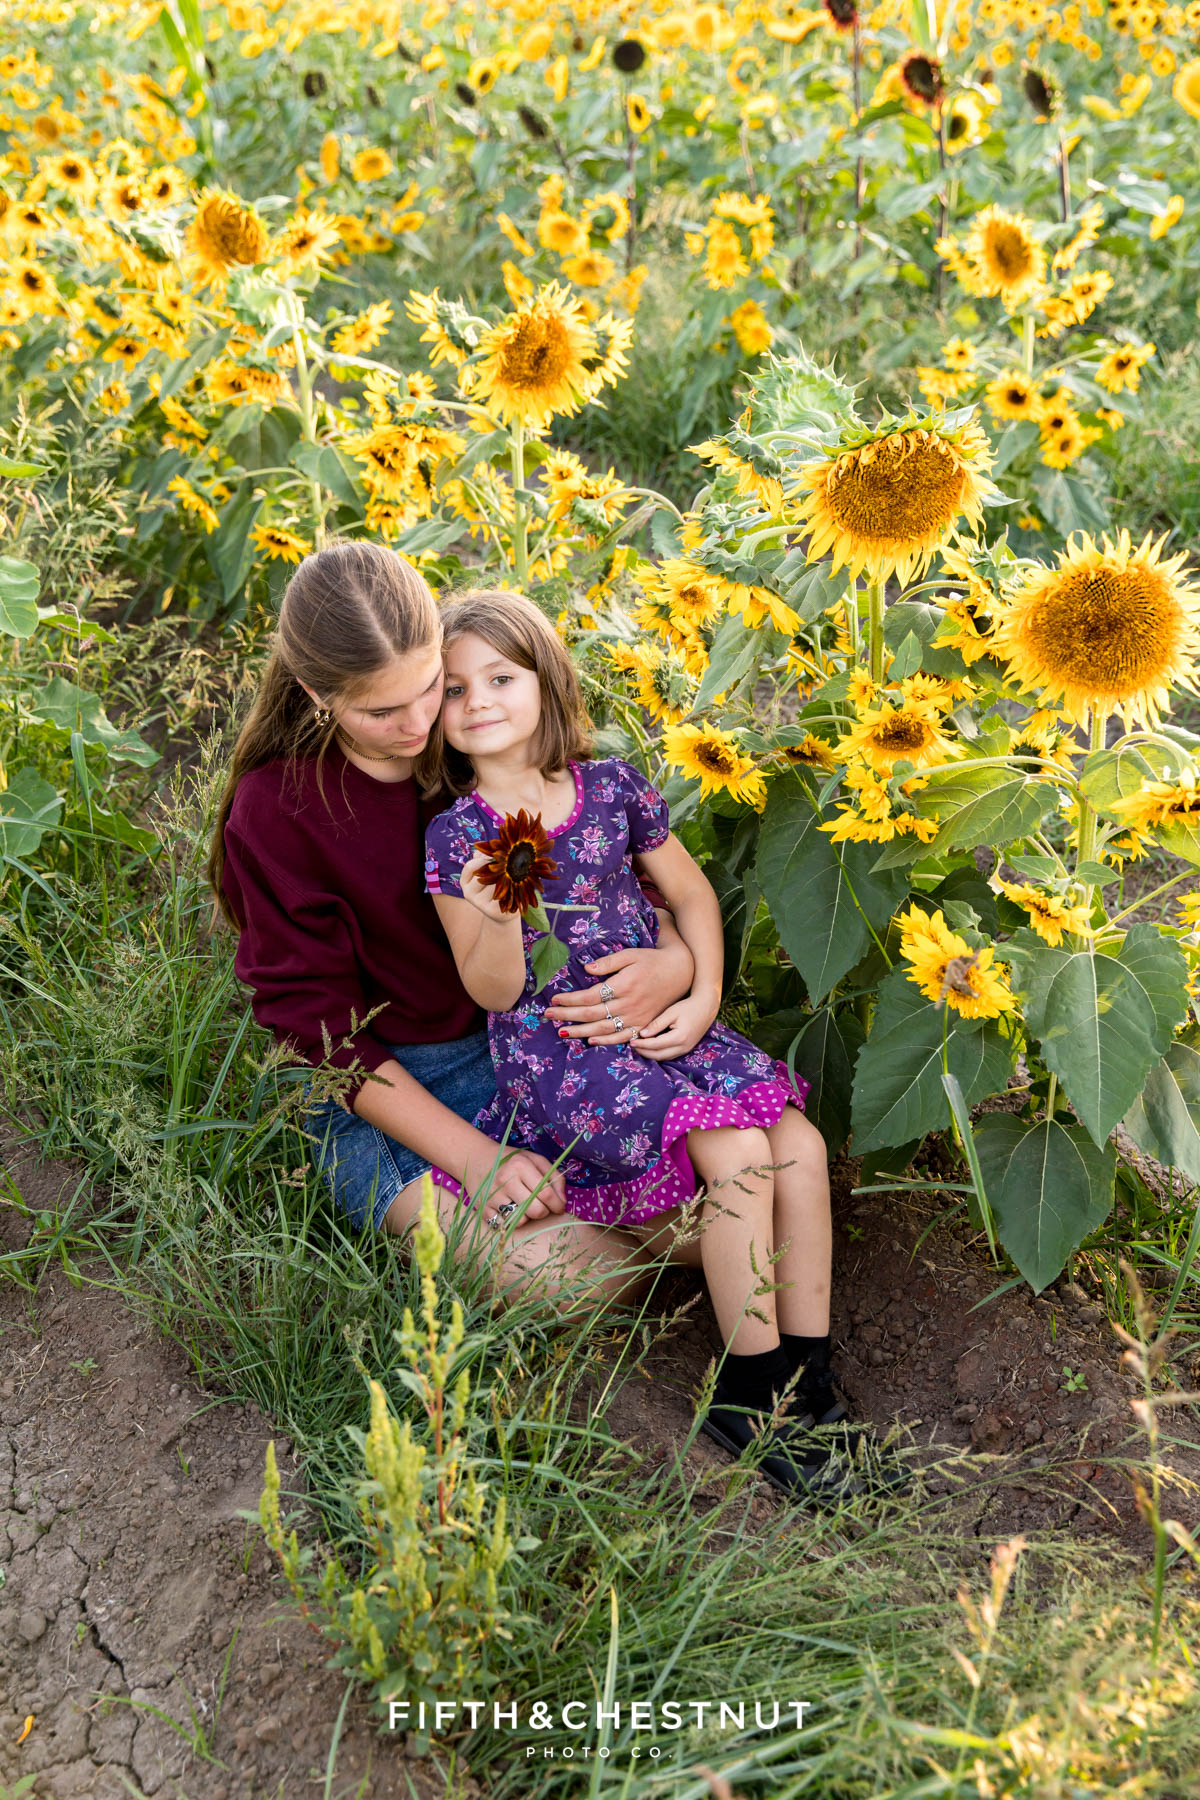 Sisters wearing shades of red and purple relax in a sunflower field for sunflower family photos at Ferrari Farms in Reno, NV.